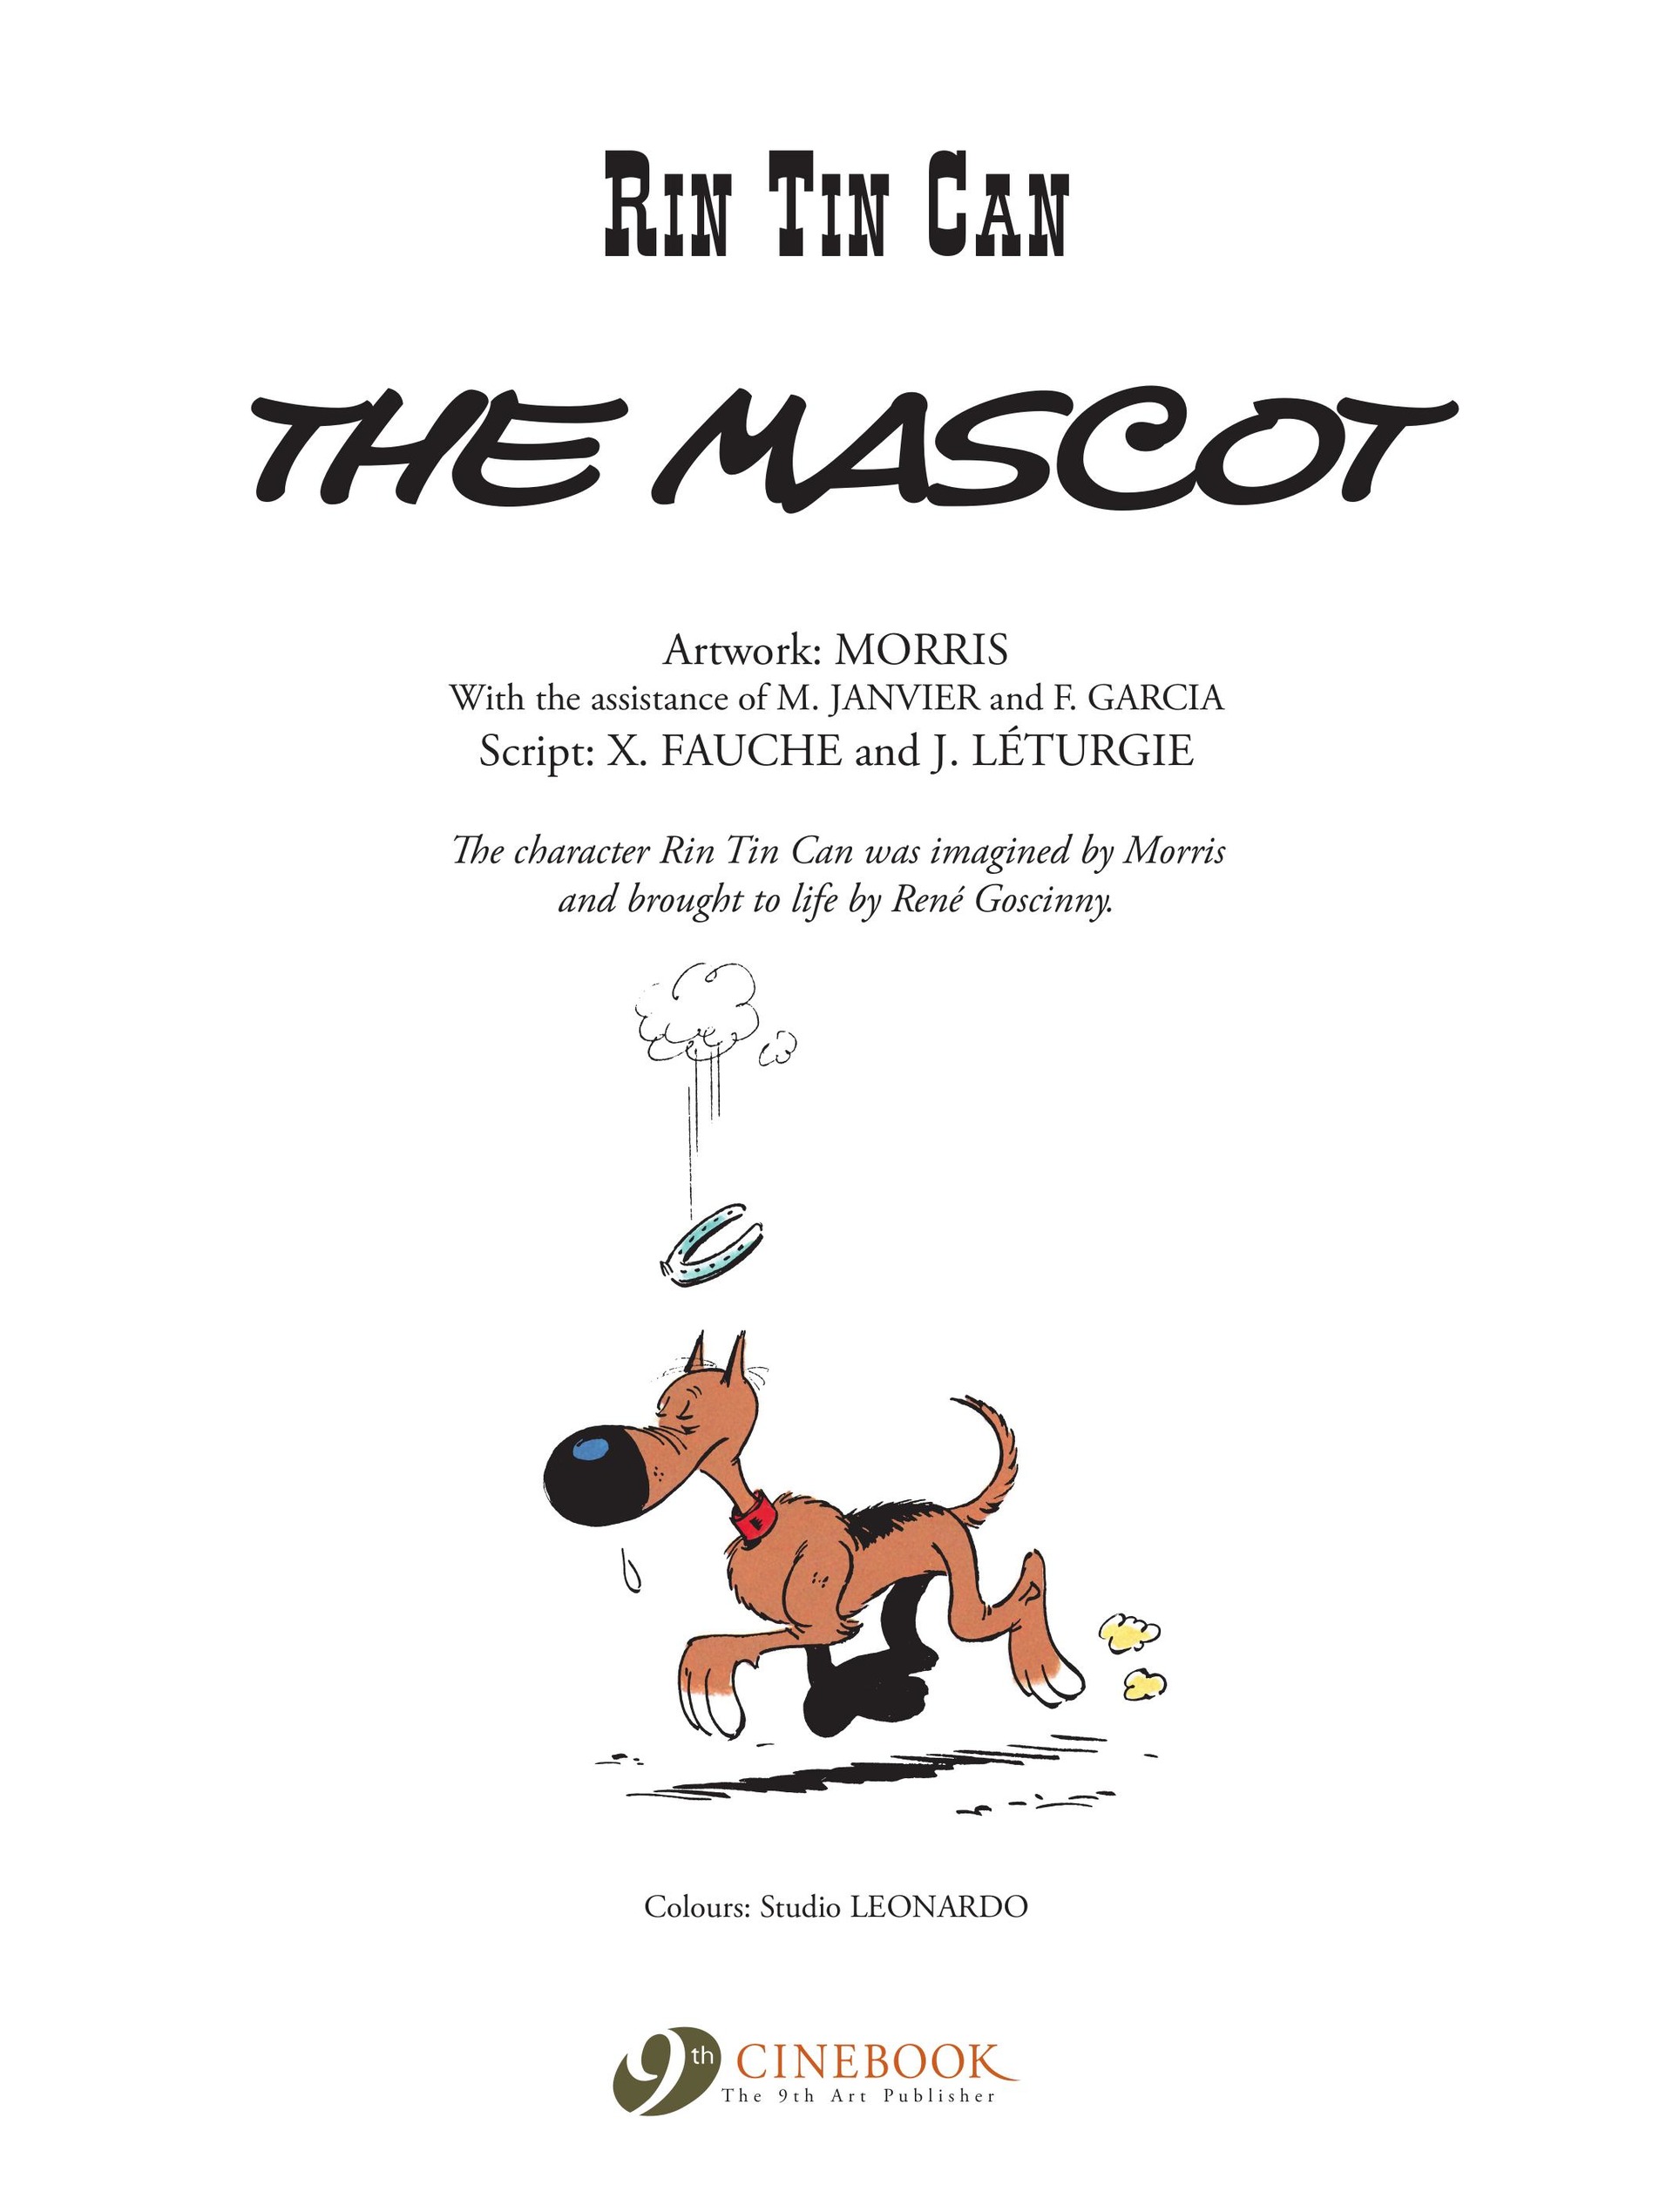 Read online Rin Tin Can: The Mascot comic -  Issue # Full - 3